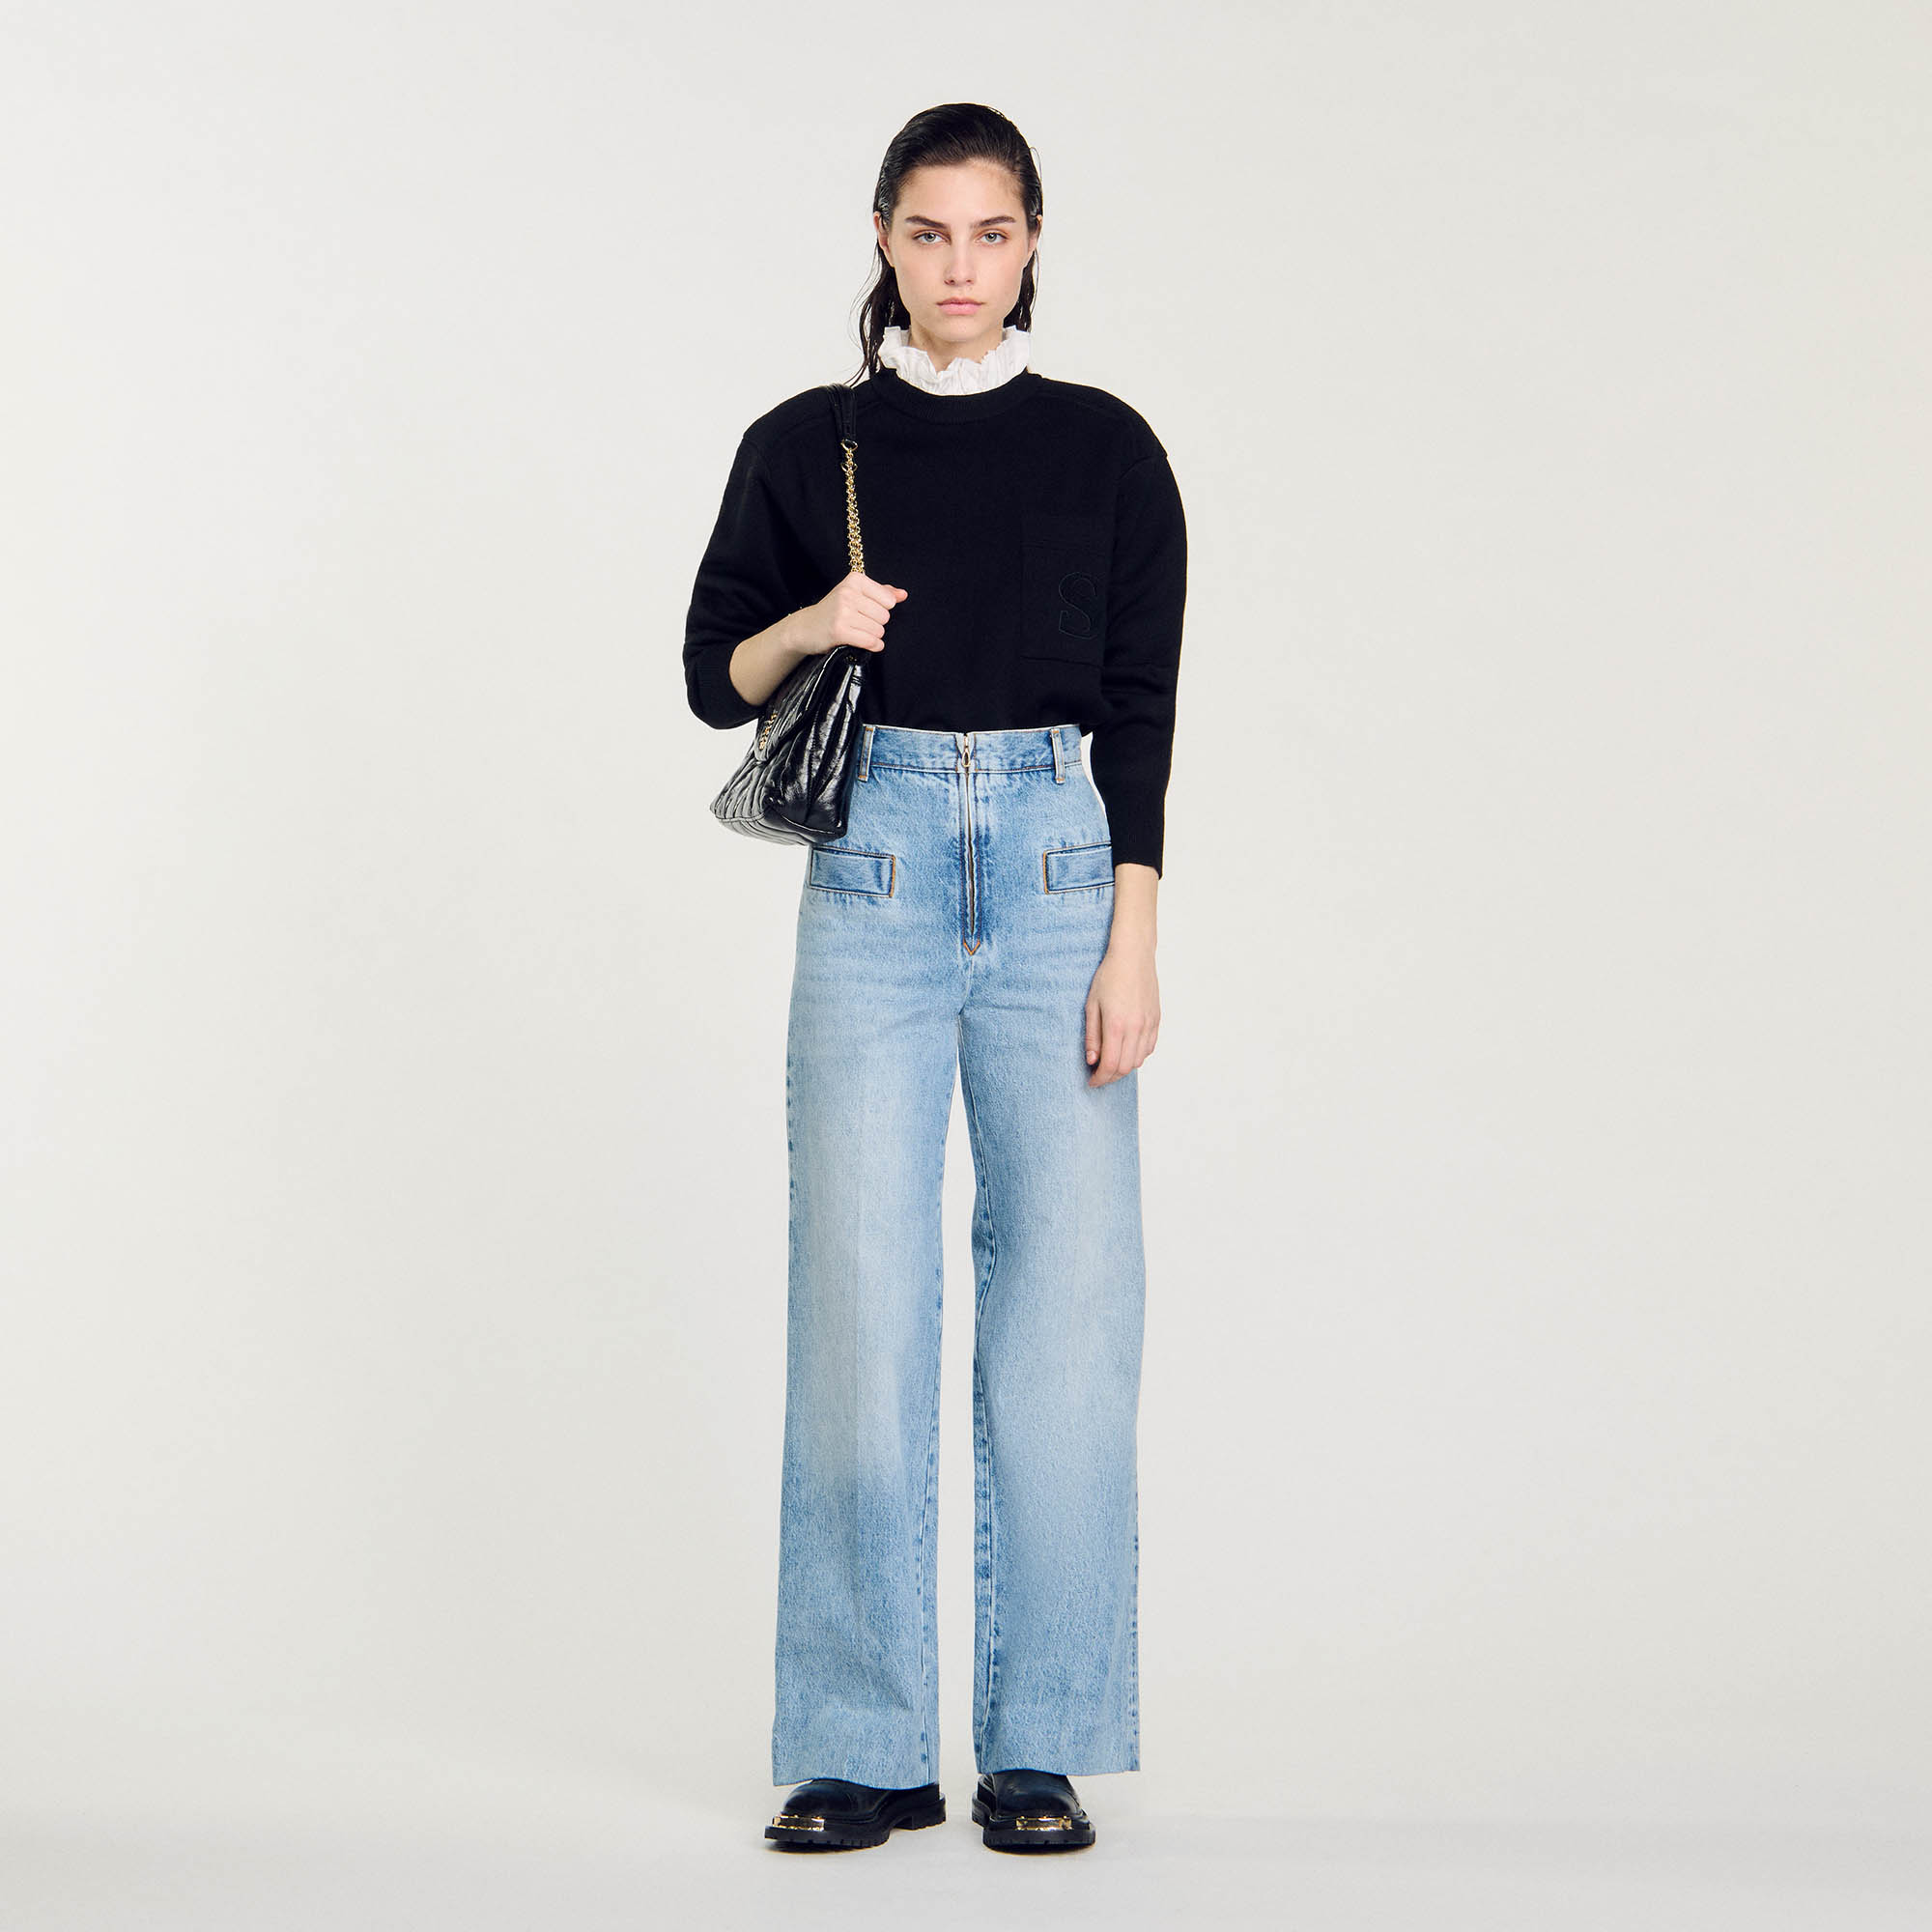 Sandro cotton Pocket lining: Wide-leg jeans in faded denim with a high waist and belt loops